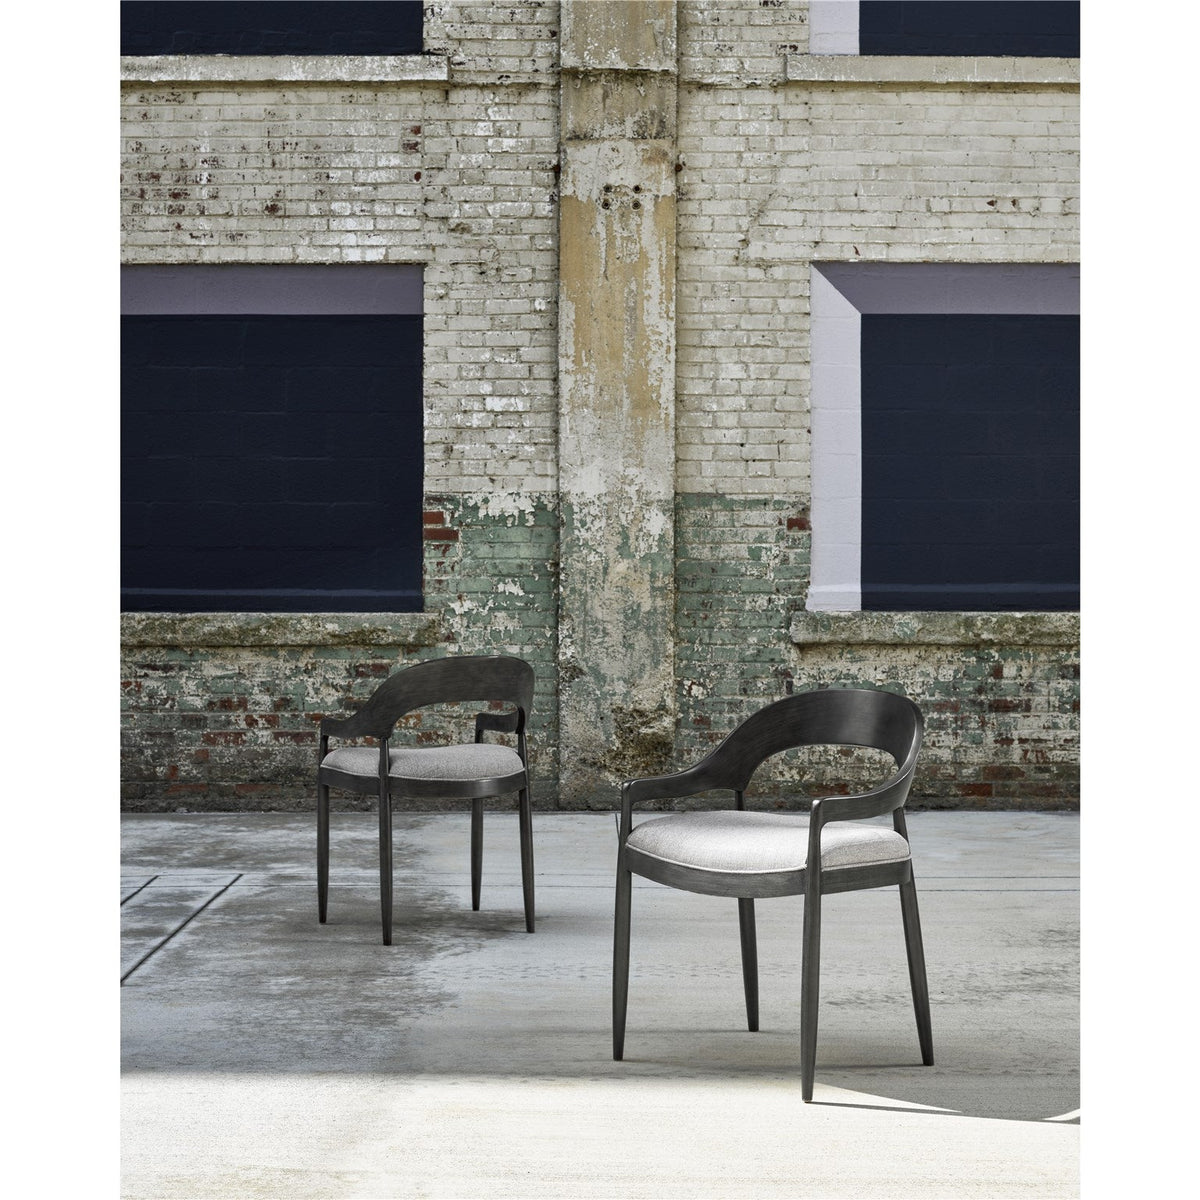 Belmont Chair - Be Bold Furniture